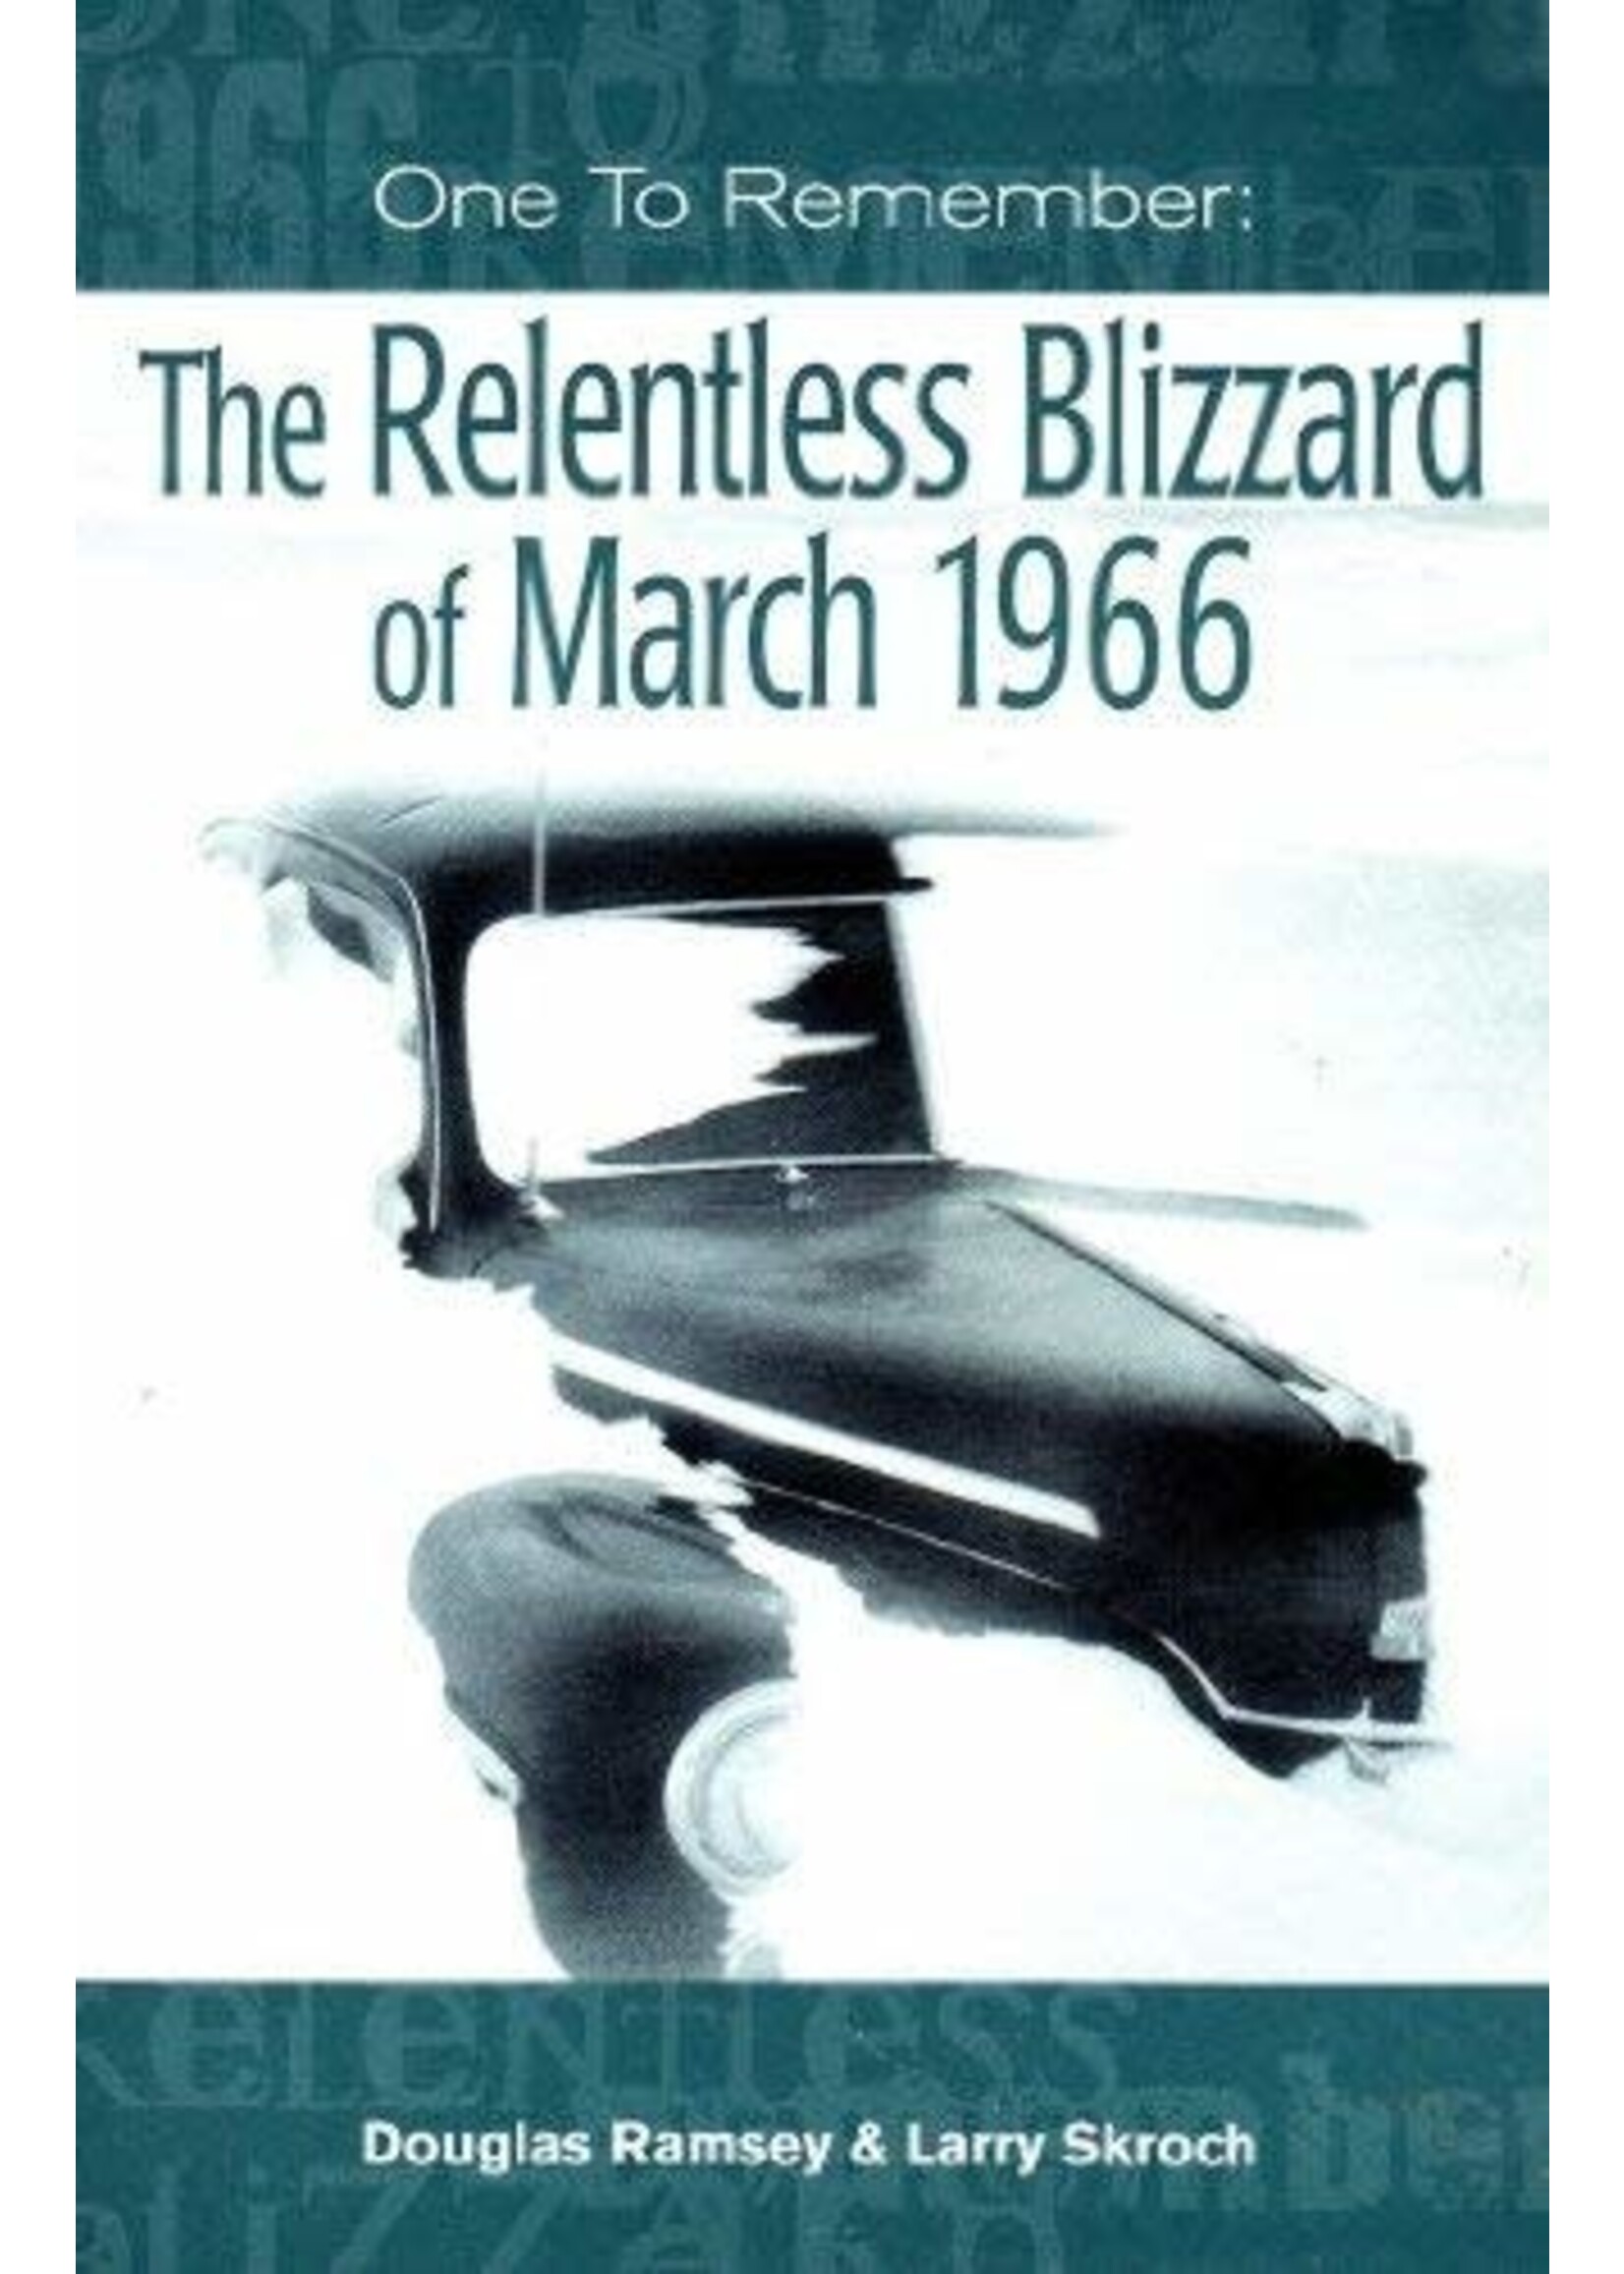 One to Remember: The Relentless Blizzard of March 1966